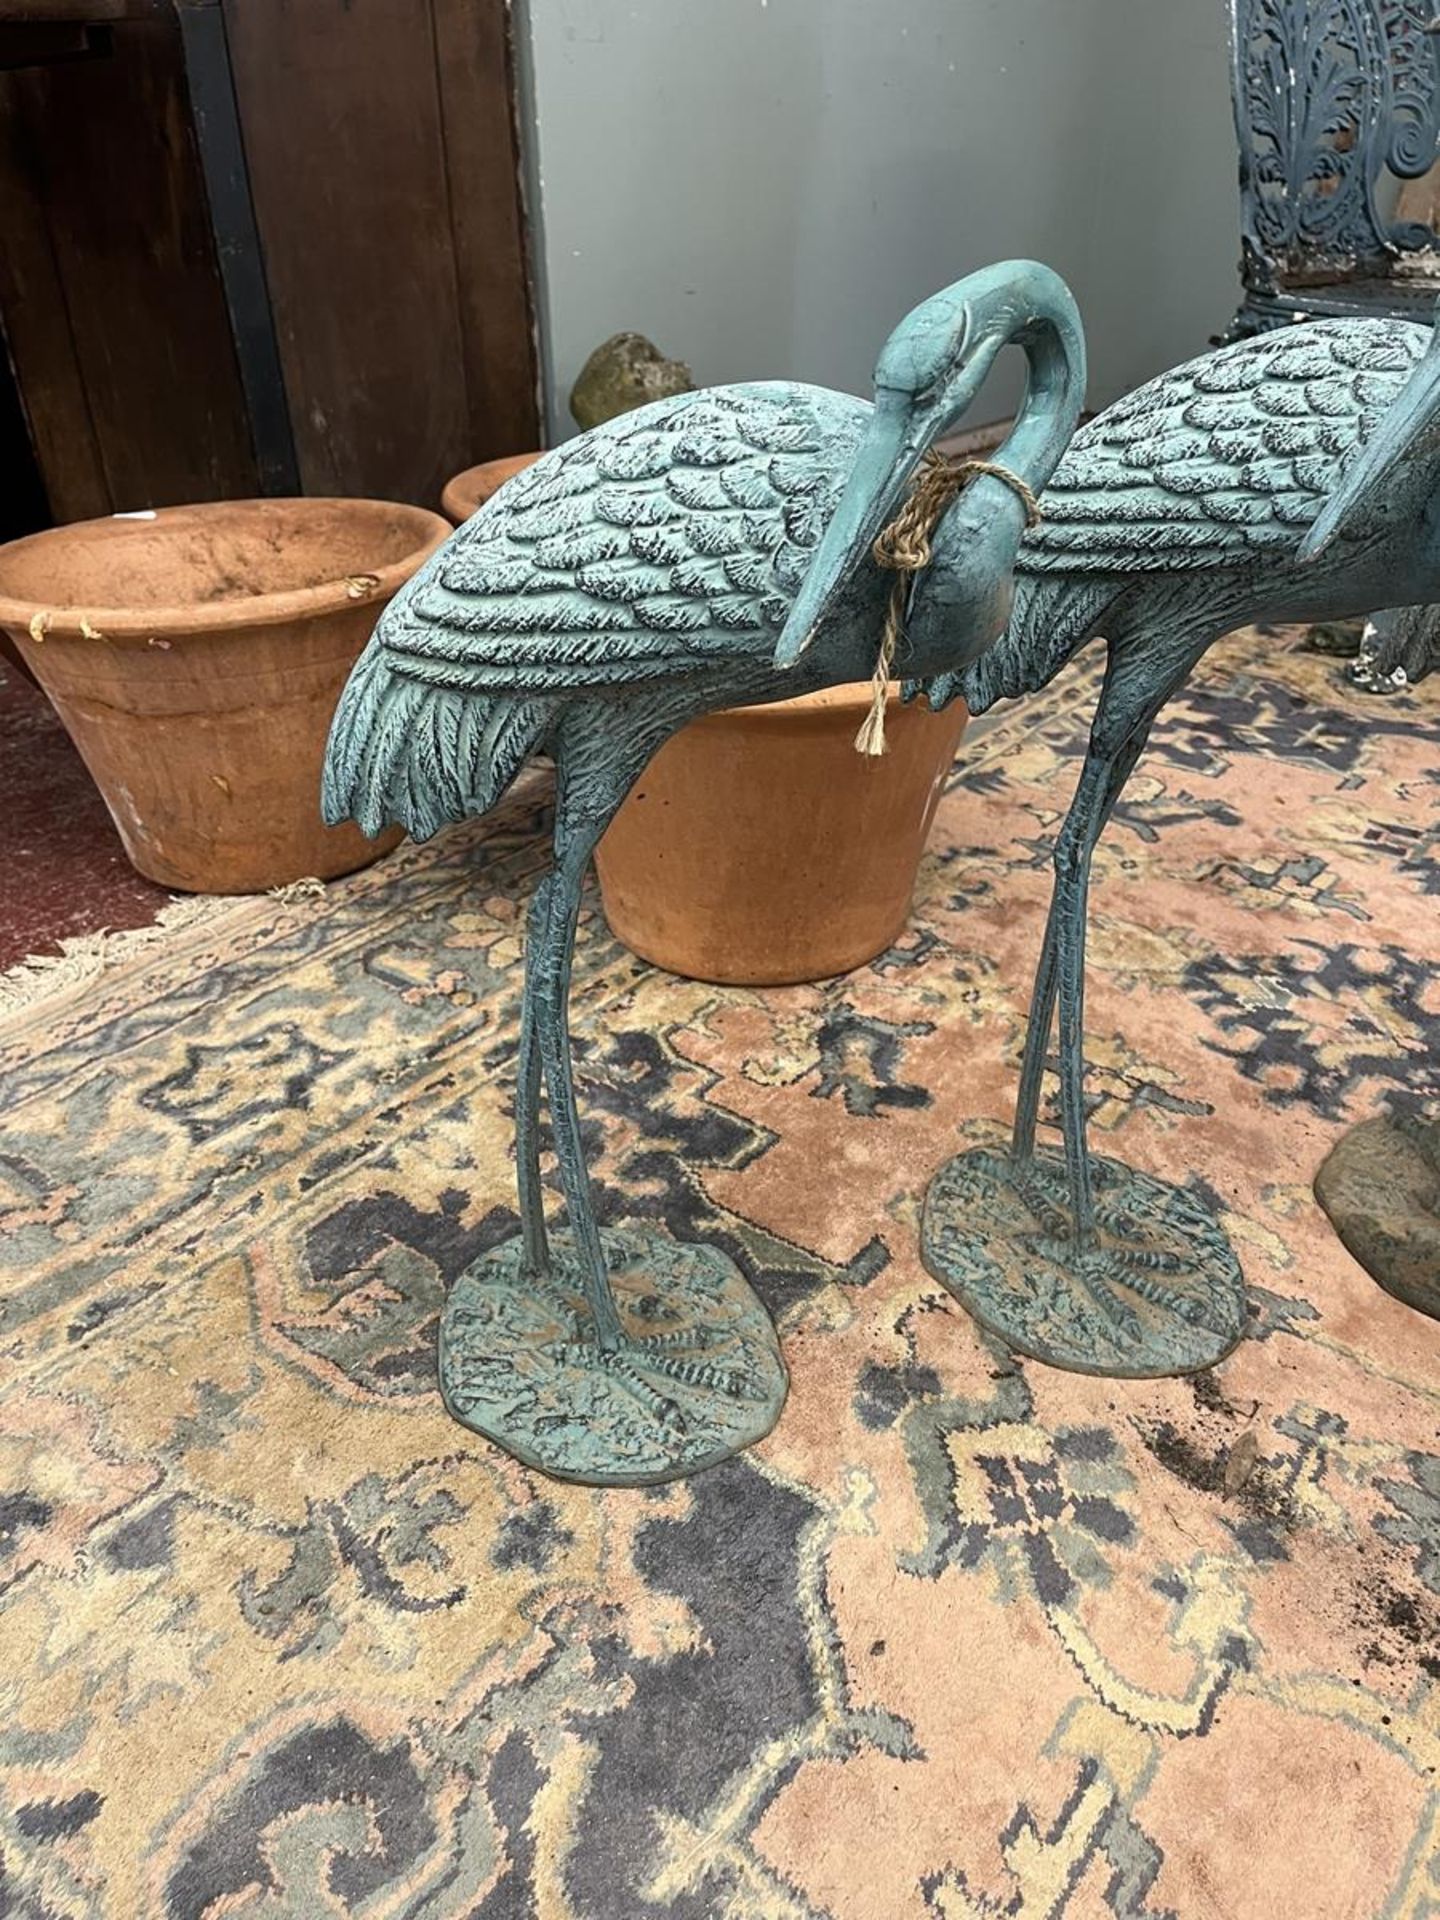 4 metal crane figures with verdigris patina - Approx height of tallest: 77cm - Image 2 of 3